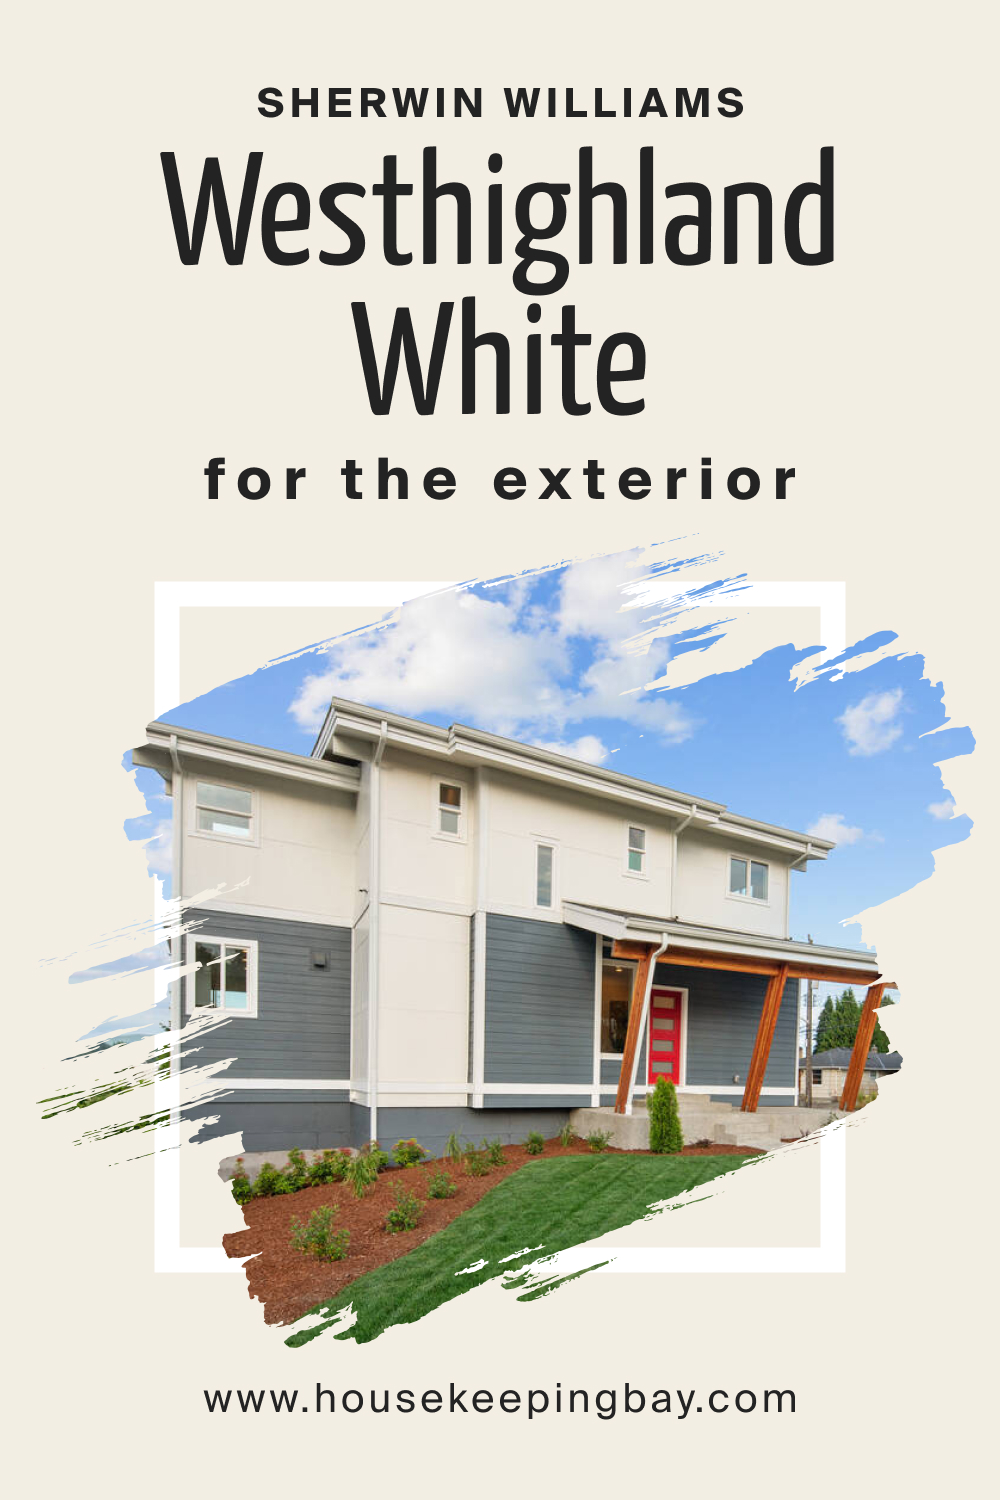 Sherwin Williams. Westhighland White SW 7566 For the exterior